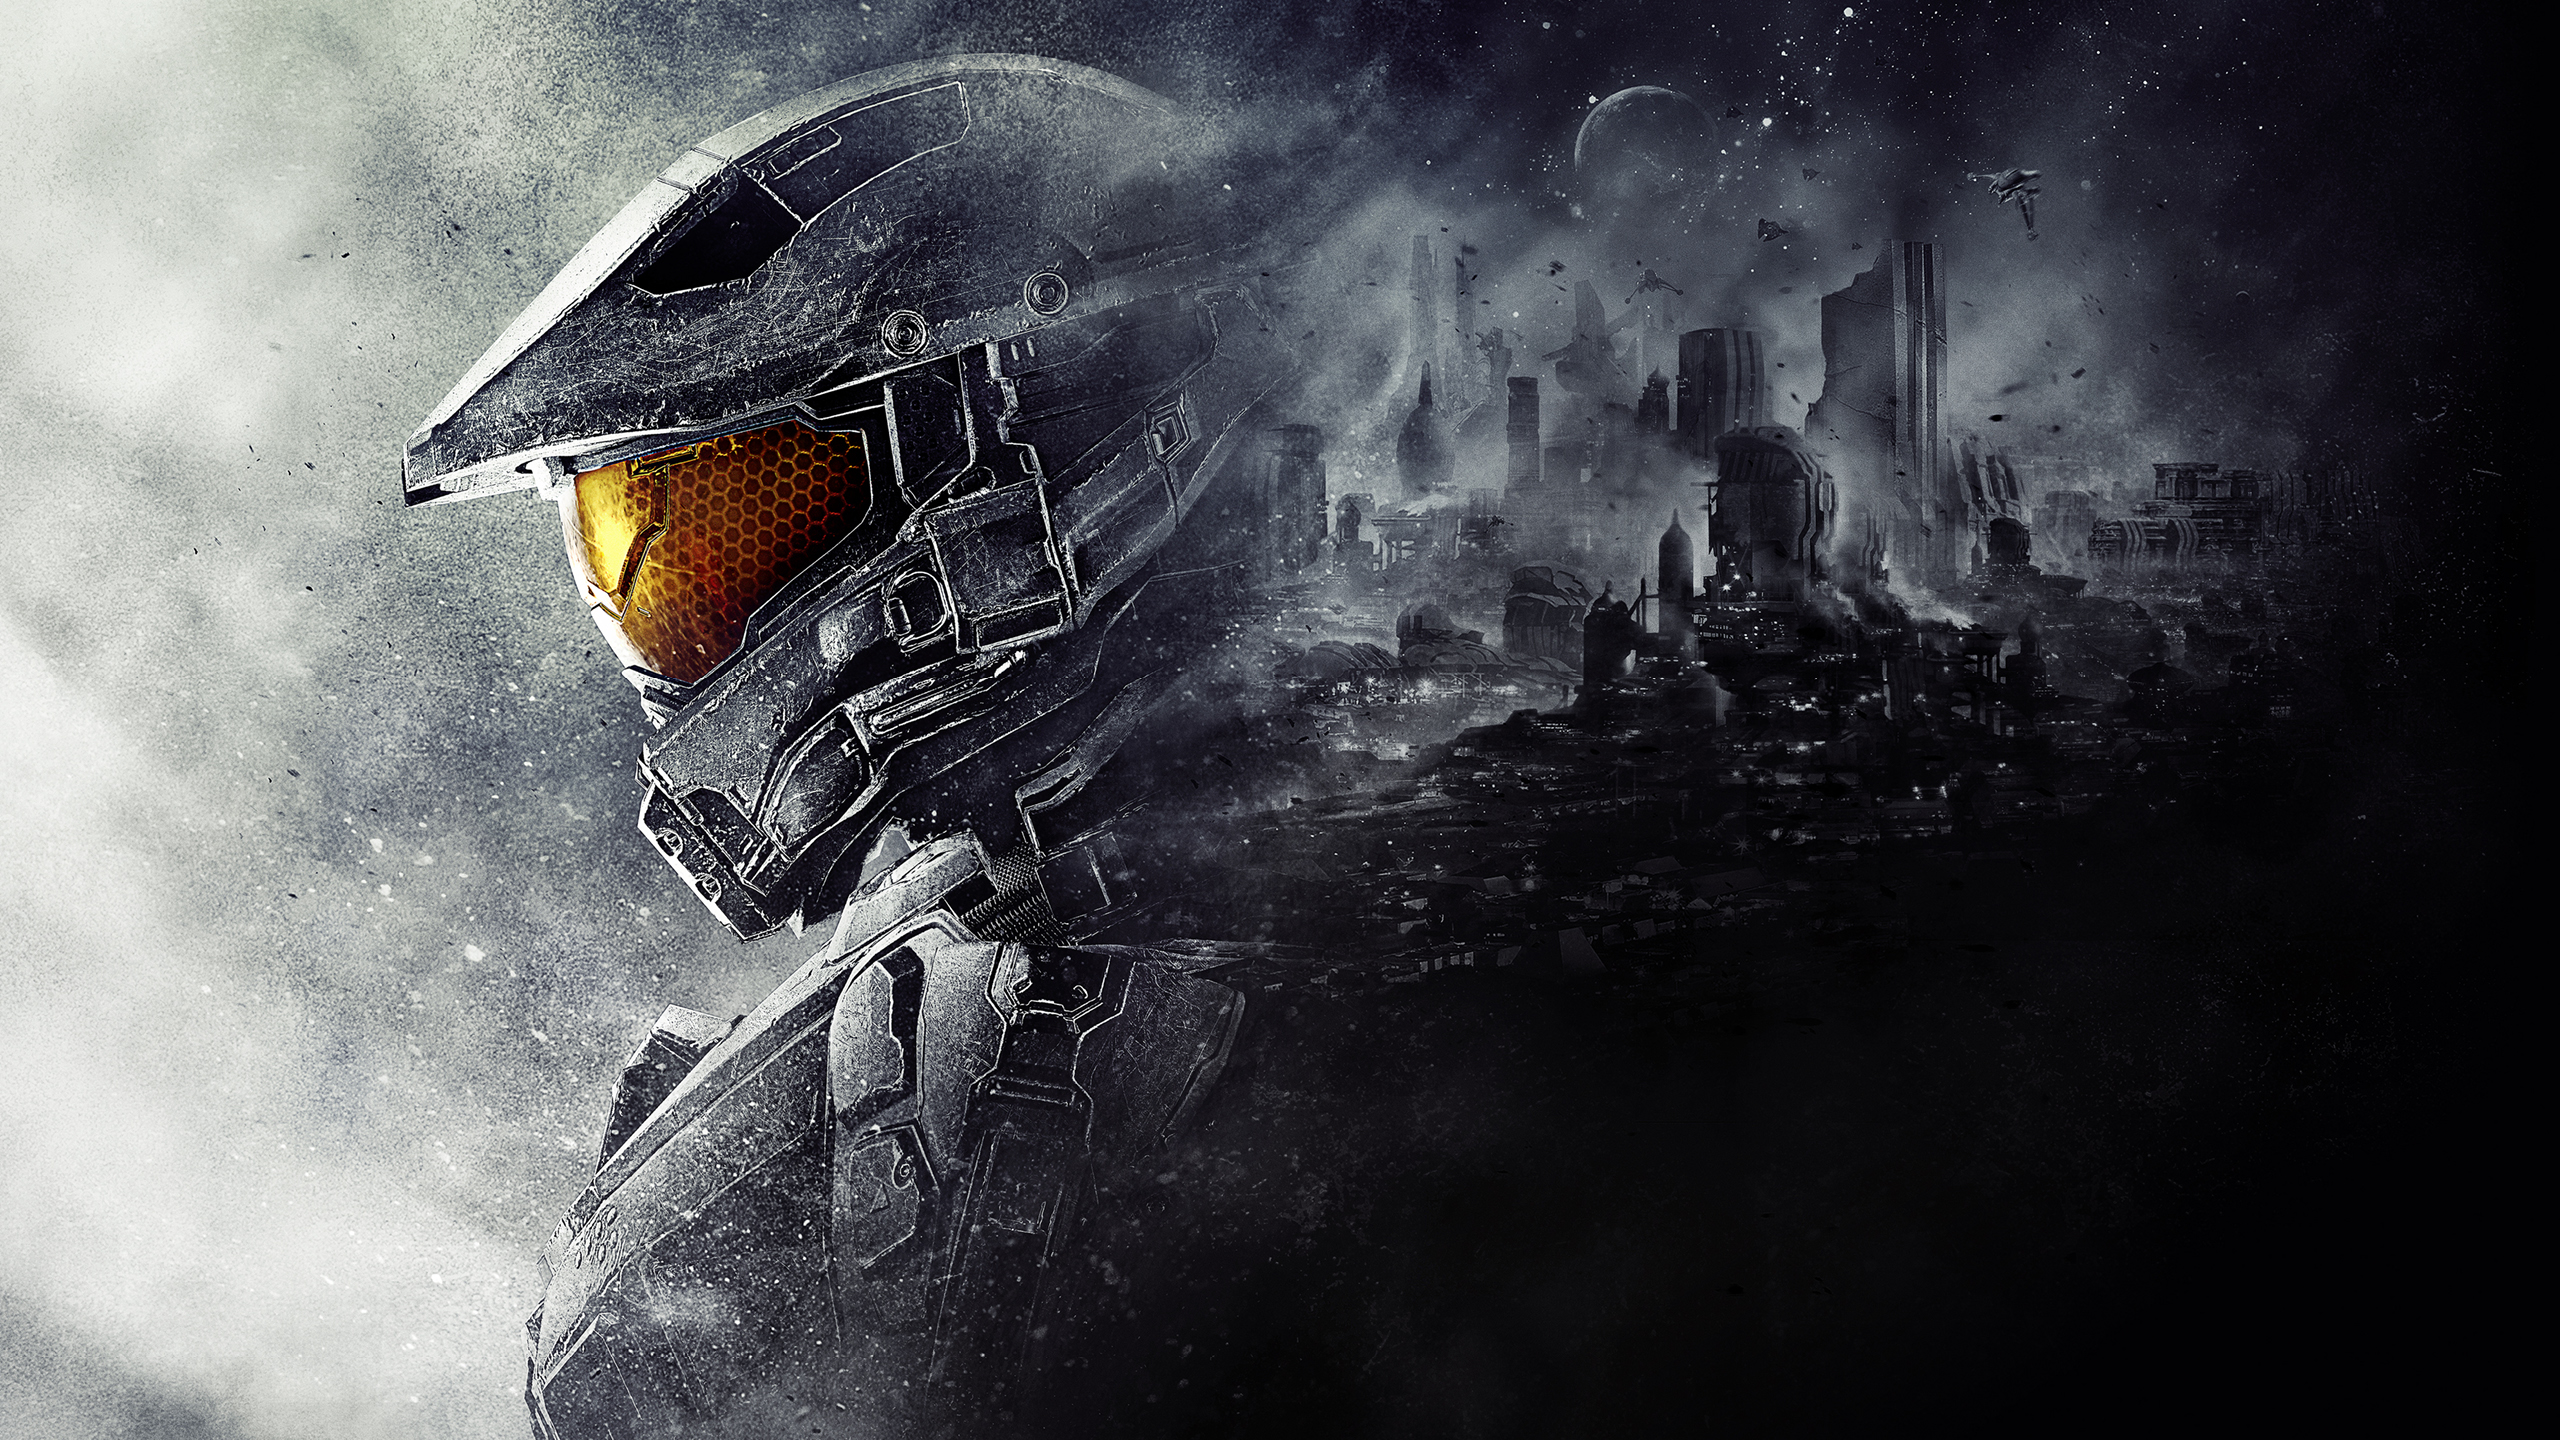 Master Chief Halo 5 Guardians Wallpapers HD Wallpapers 2560x1440